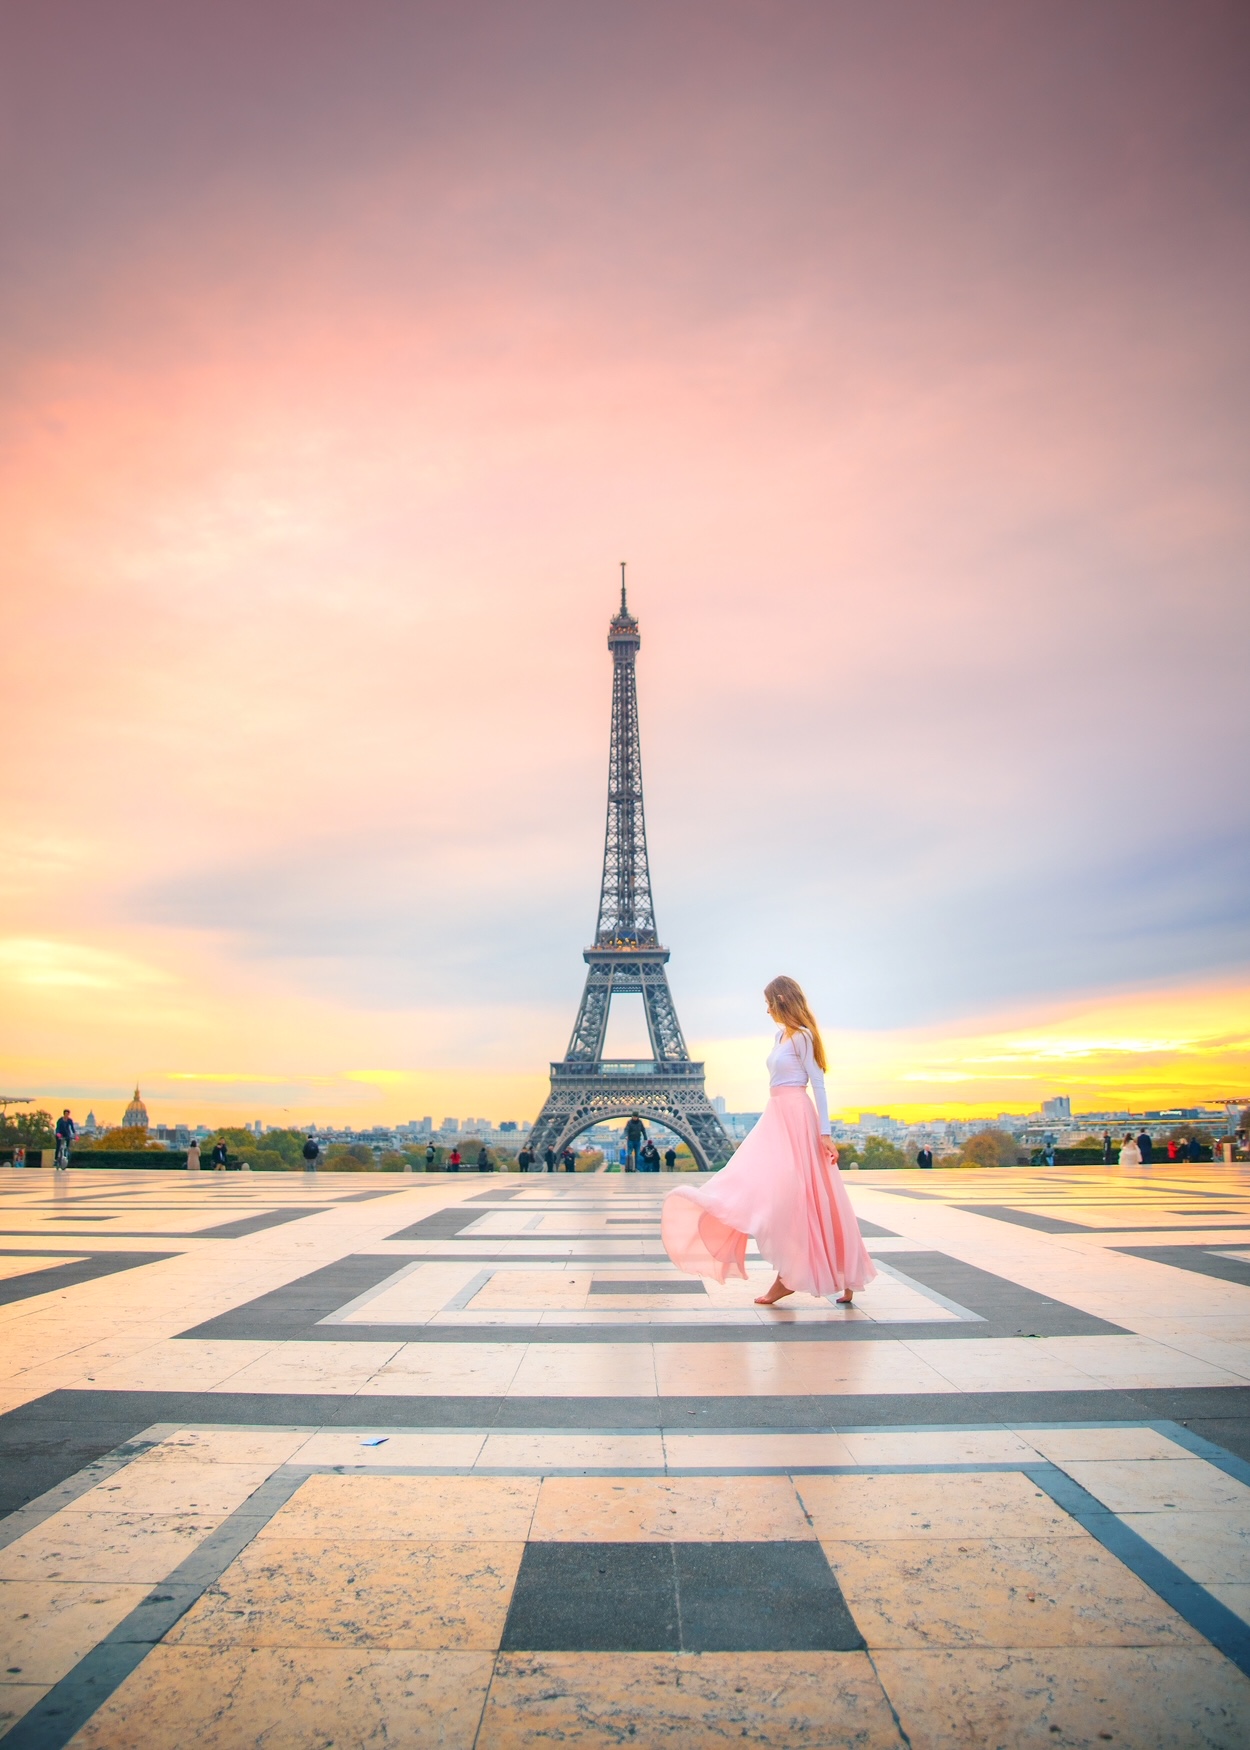 Pink sunrise at Place du Trocadero with a woman in a flowing pink skirt.